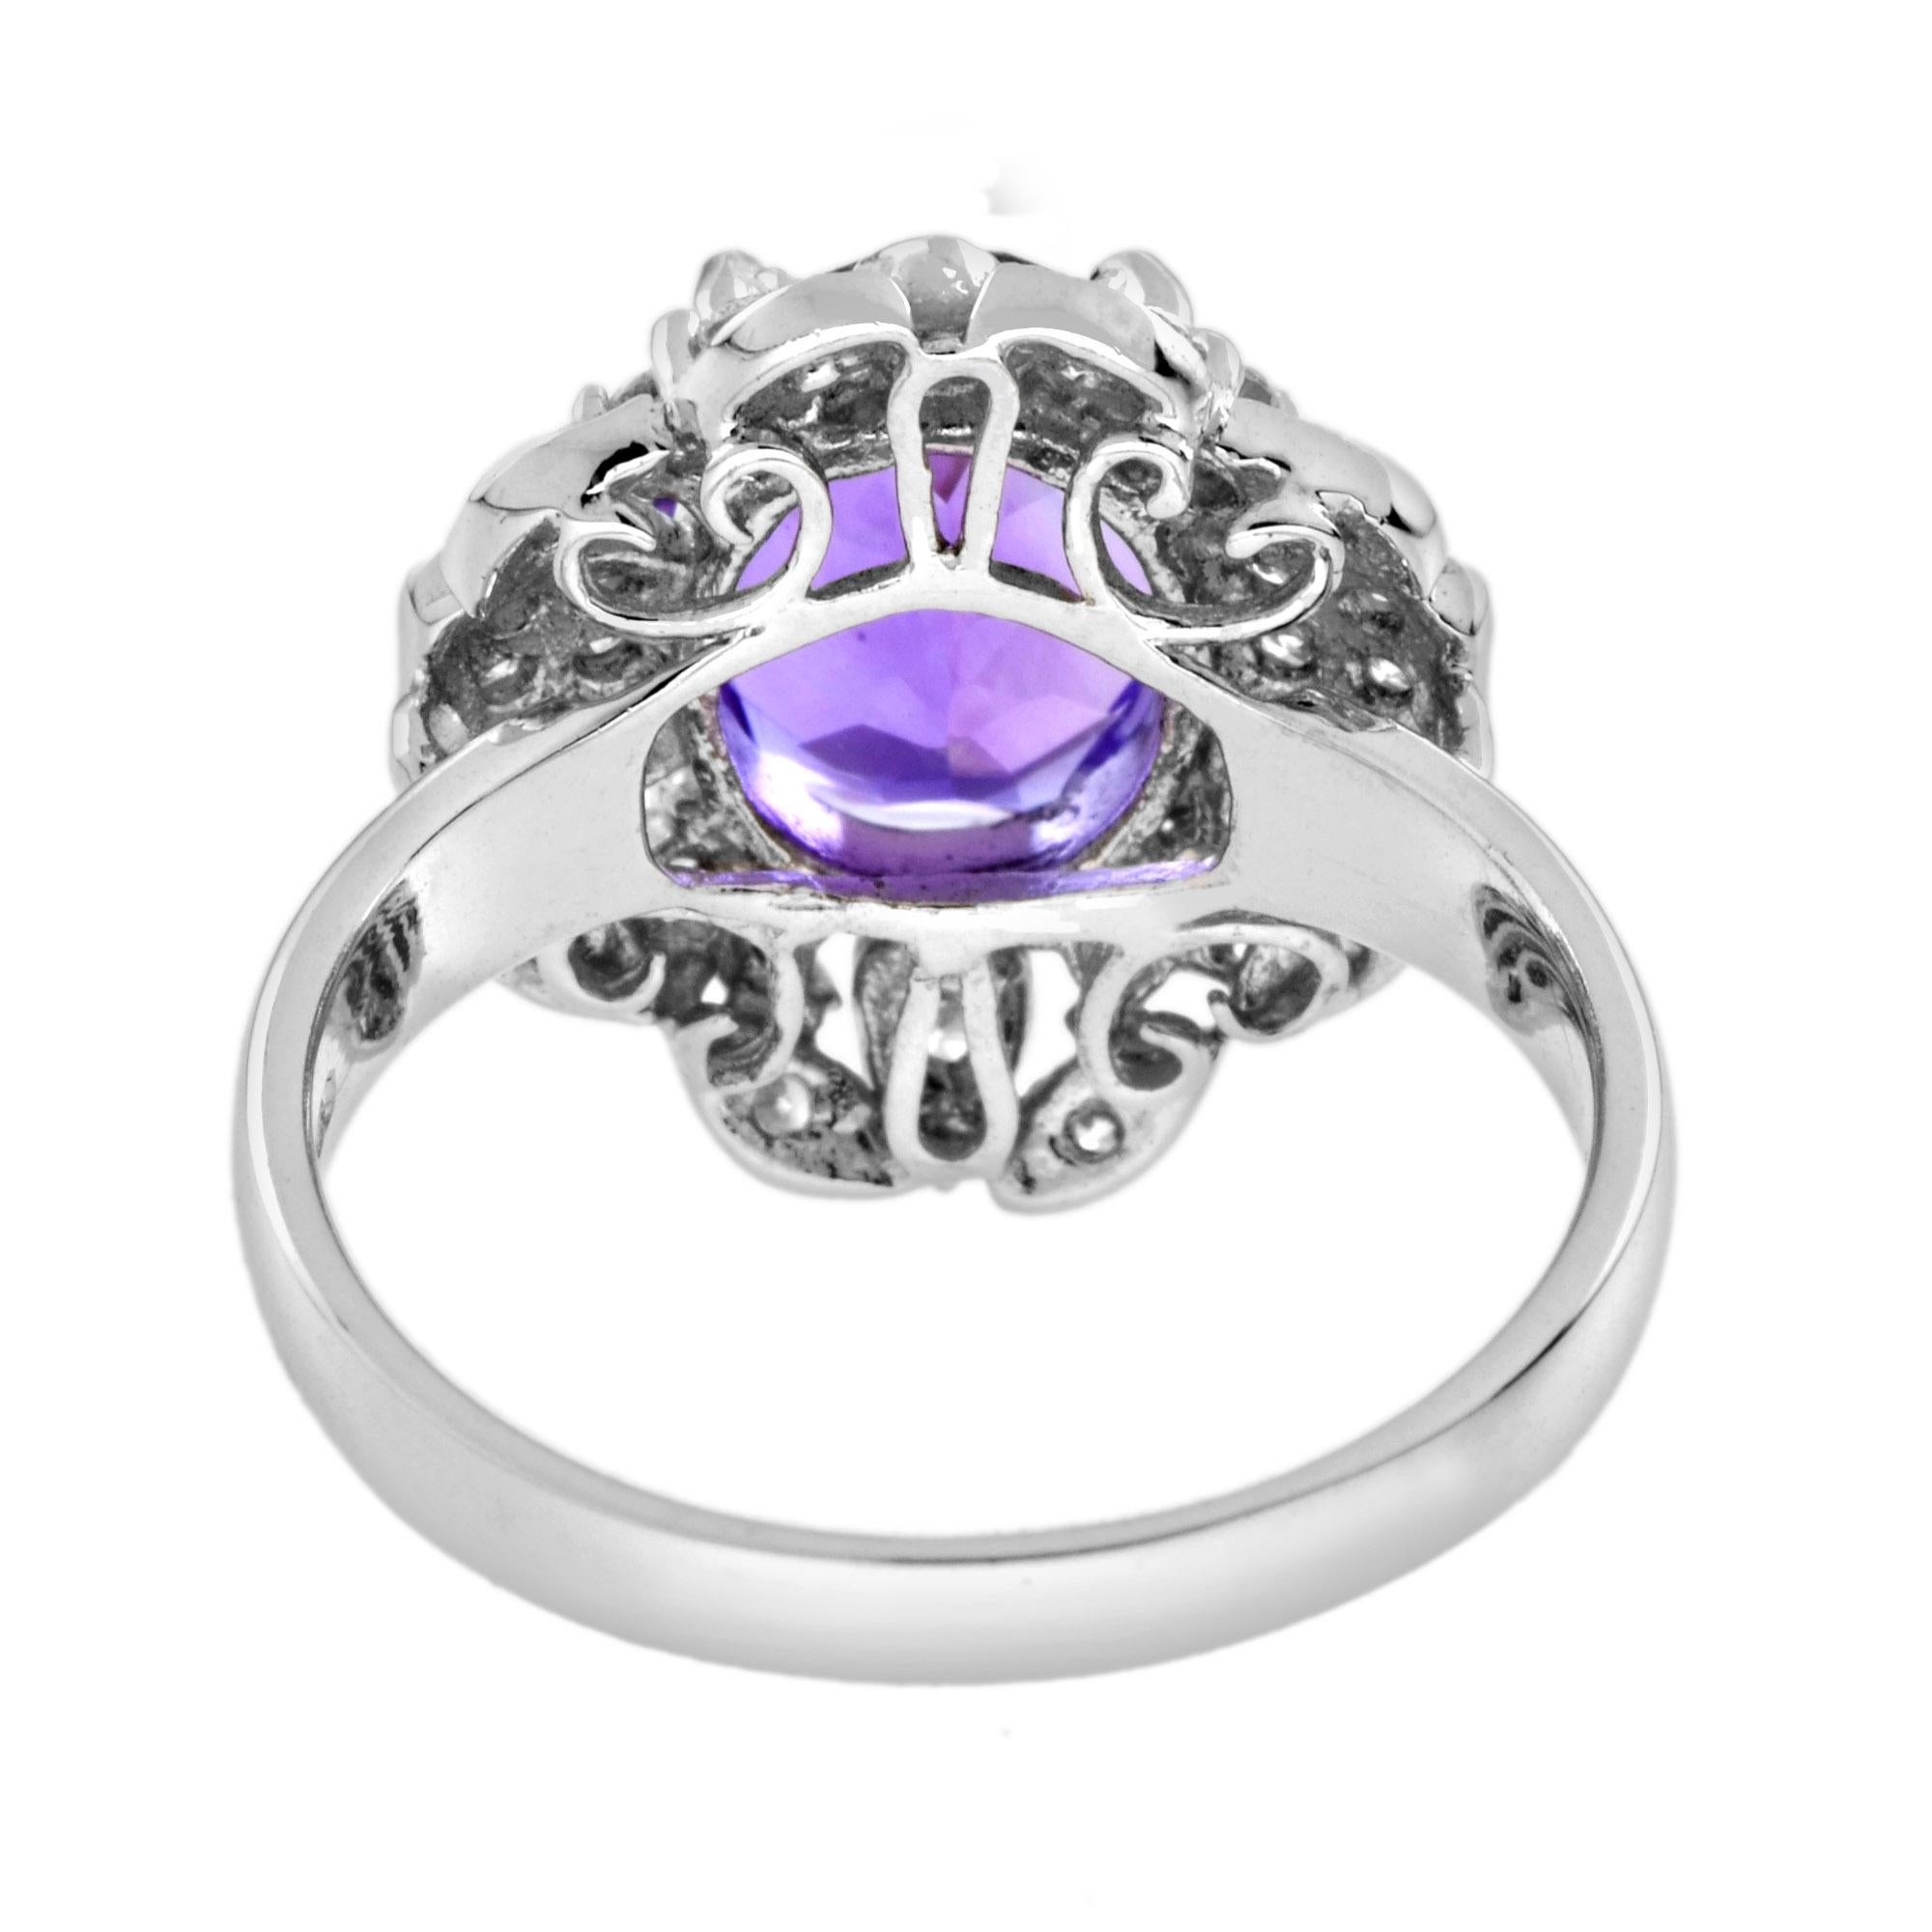 For Sale:  2.6 Ct. Amethyst and Diamond Halo Ring in 18K White Gold 4